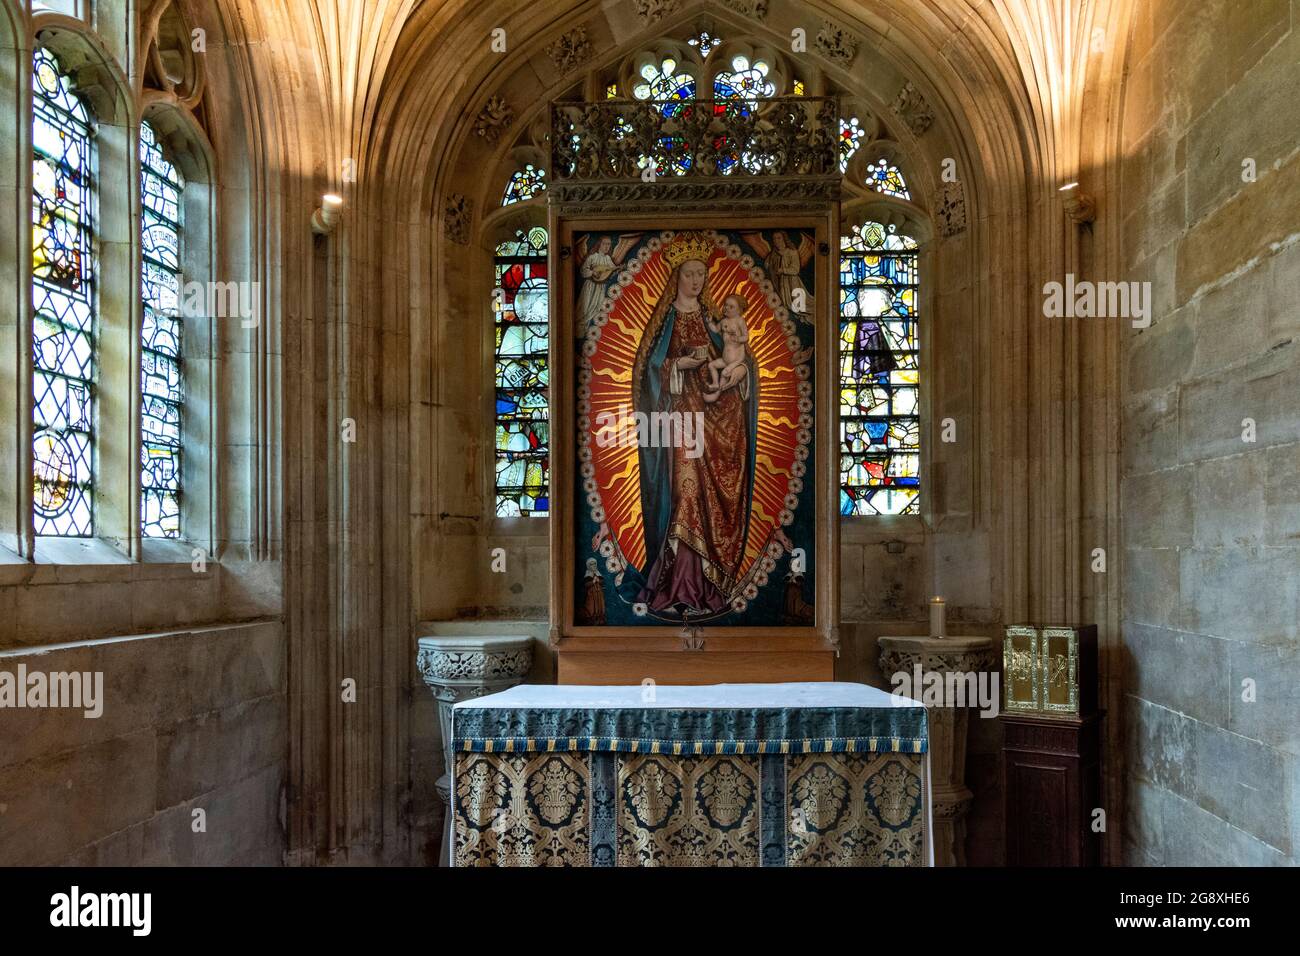 CAMBRIDGE ENGLAND KING'S COLLEGE CHAPEL INTERIOR THE MADONNA IN THE ROSARY ON THE ALTAR WITHIN ST. EDWARDS CHAPEL Stock Photo